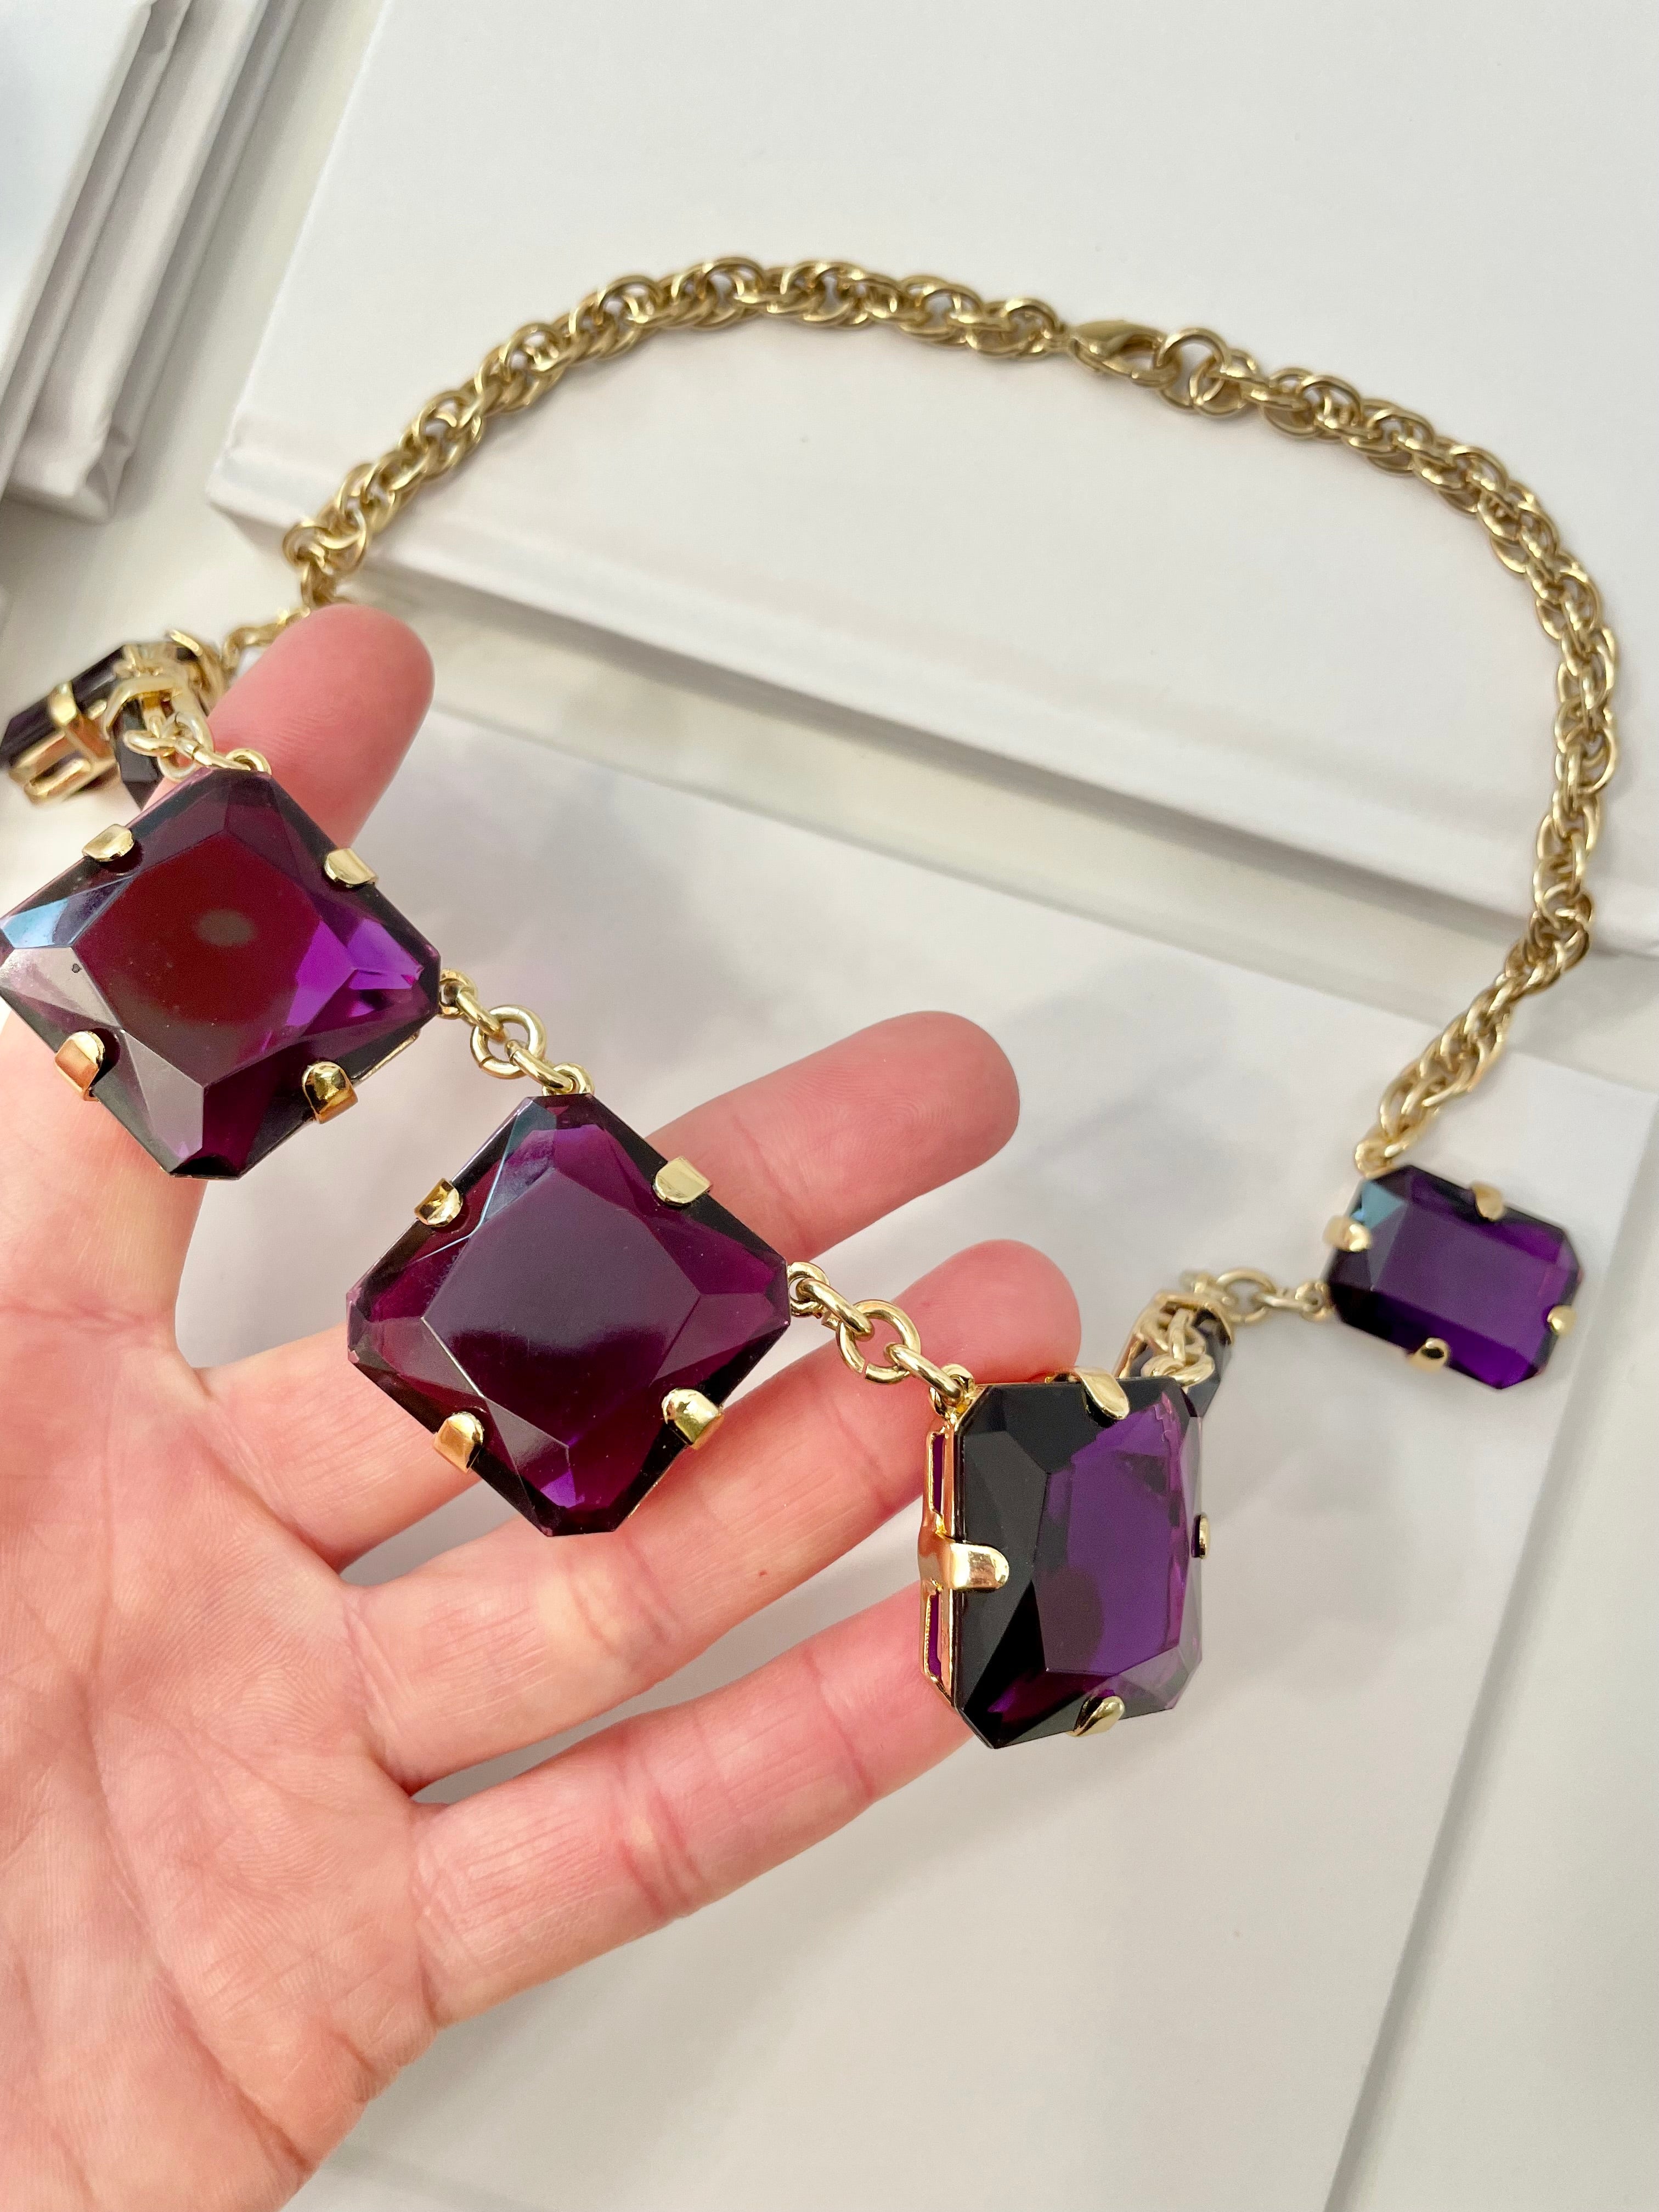 The Happy Hostess and her love affair with color. This stunning deep purple stone statement necklace is truly extraordinary!